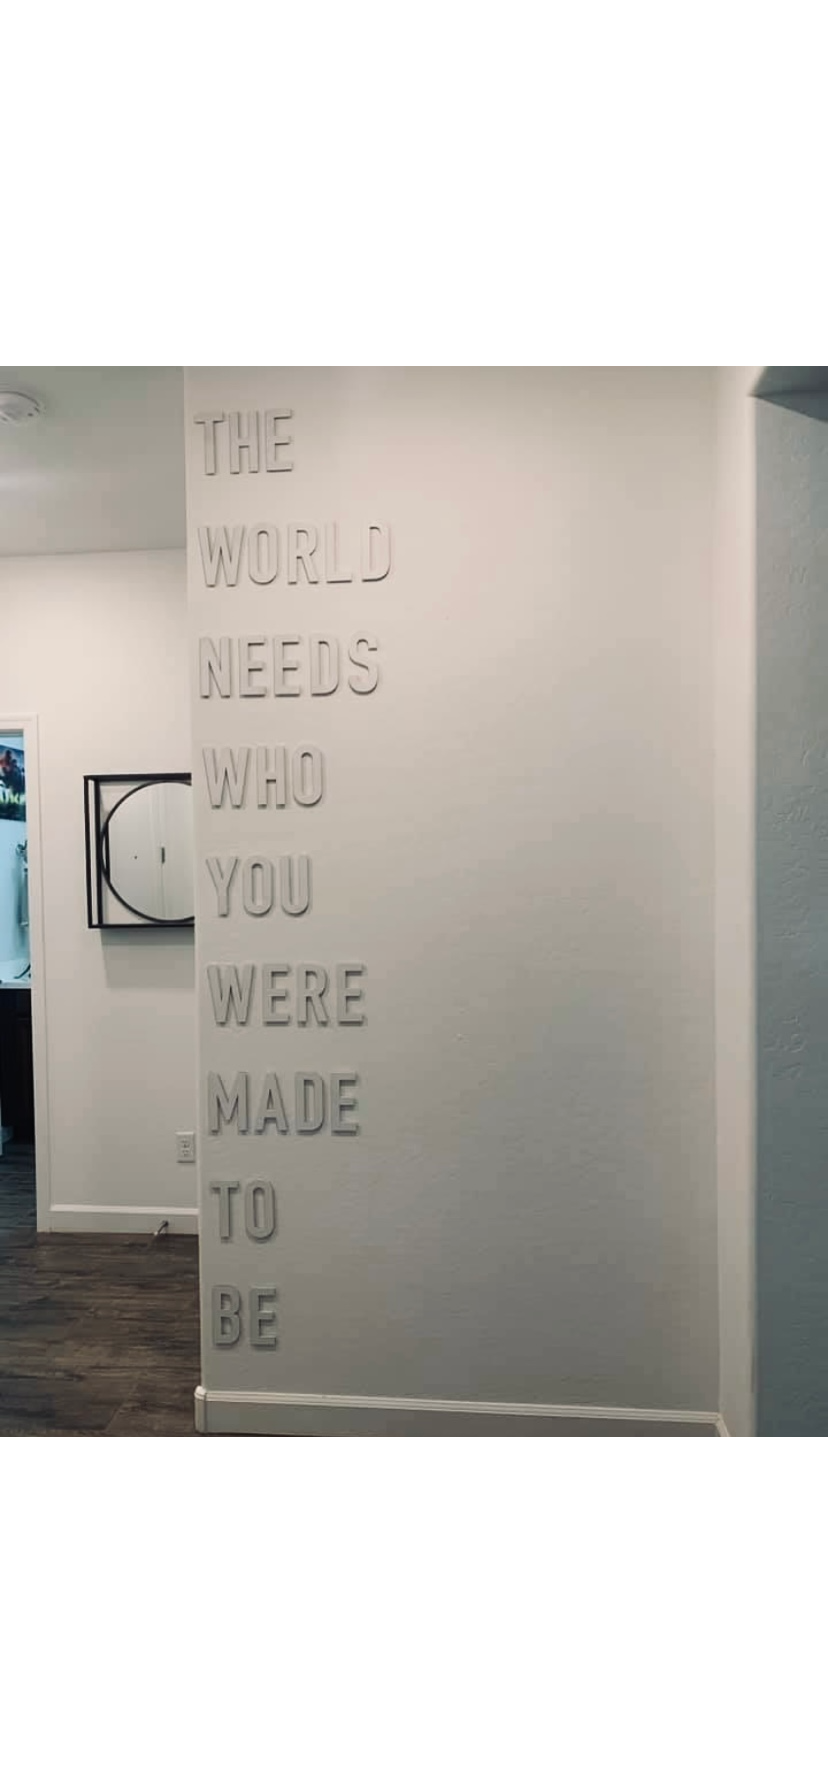 The world needs who you were made to be